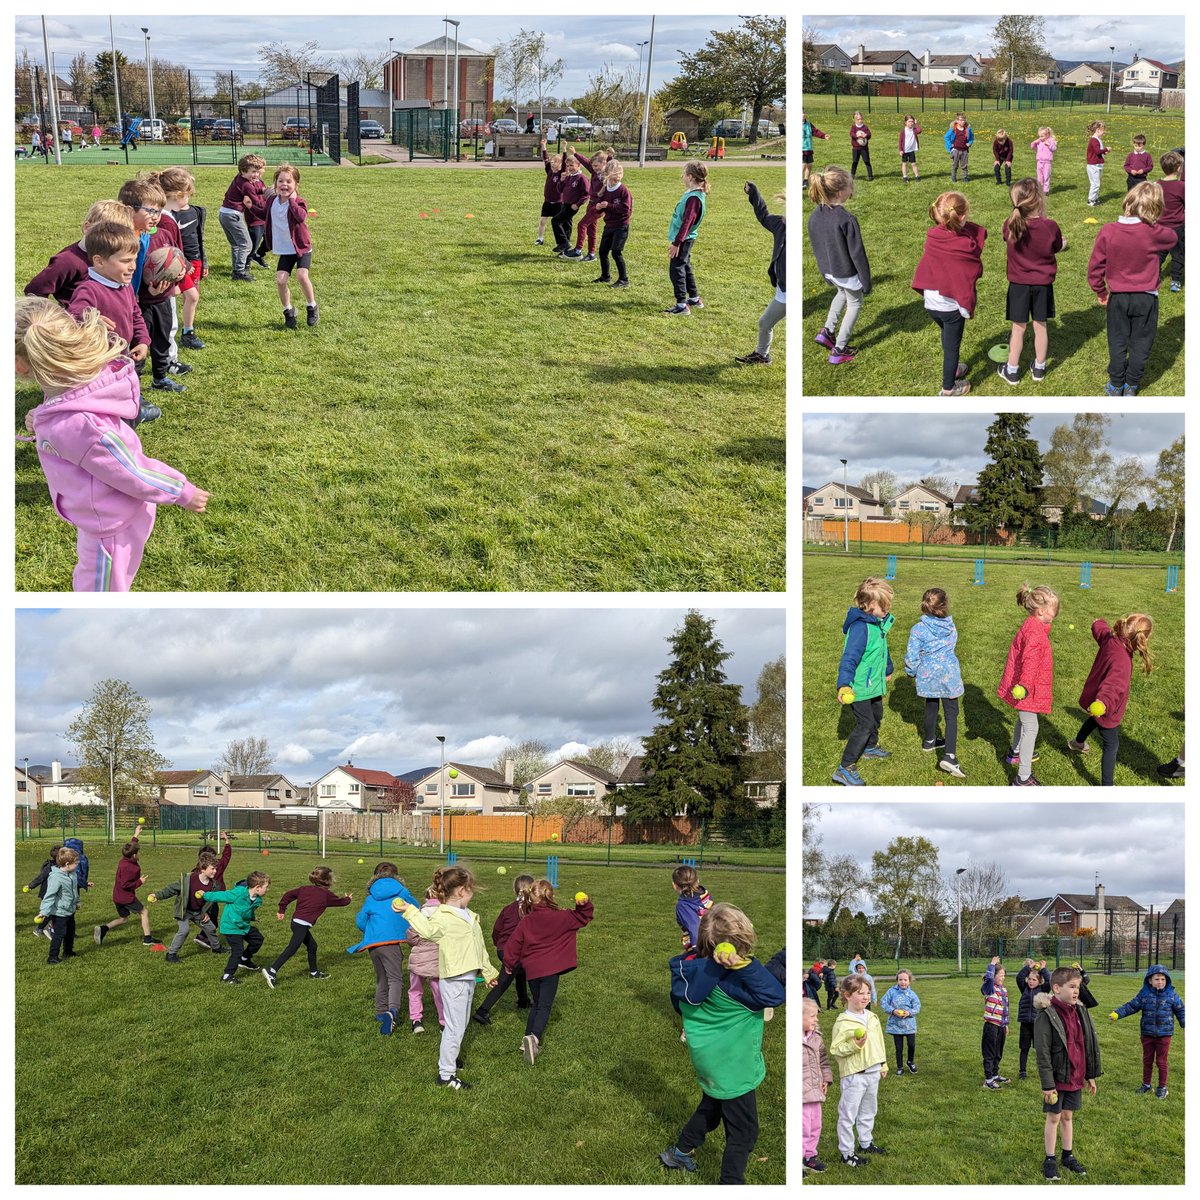 P1 loved their busy day learning cricket and rugby skills! #healthweek